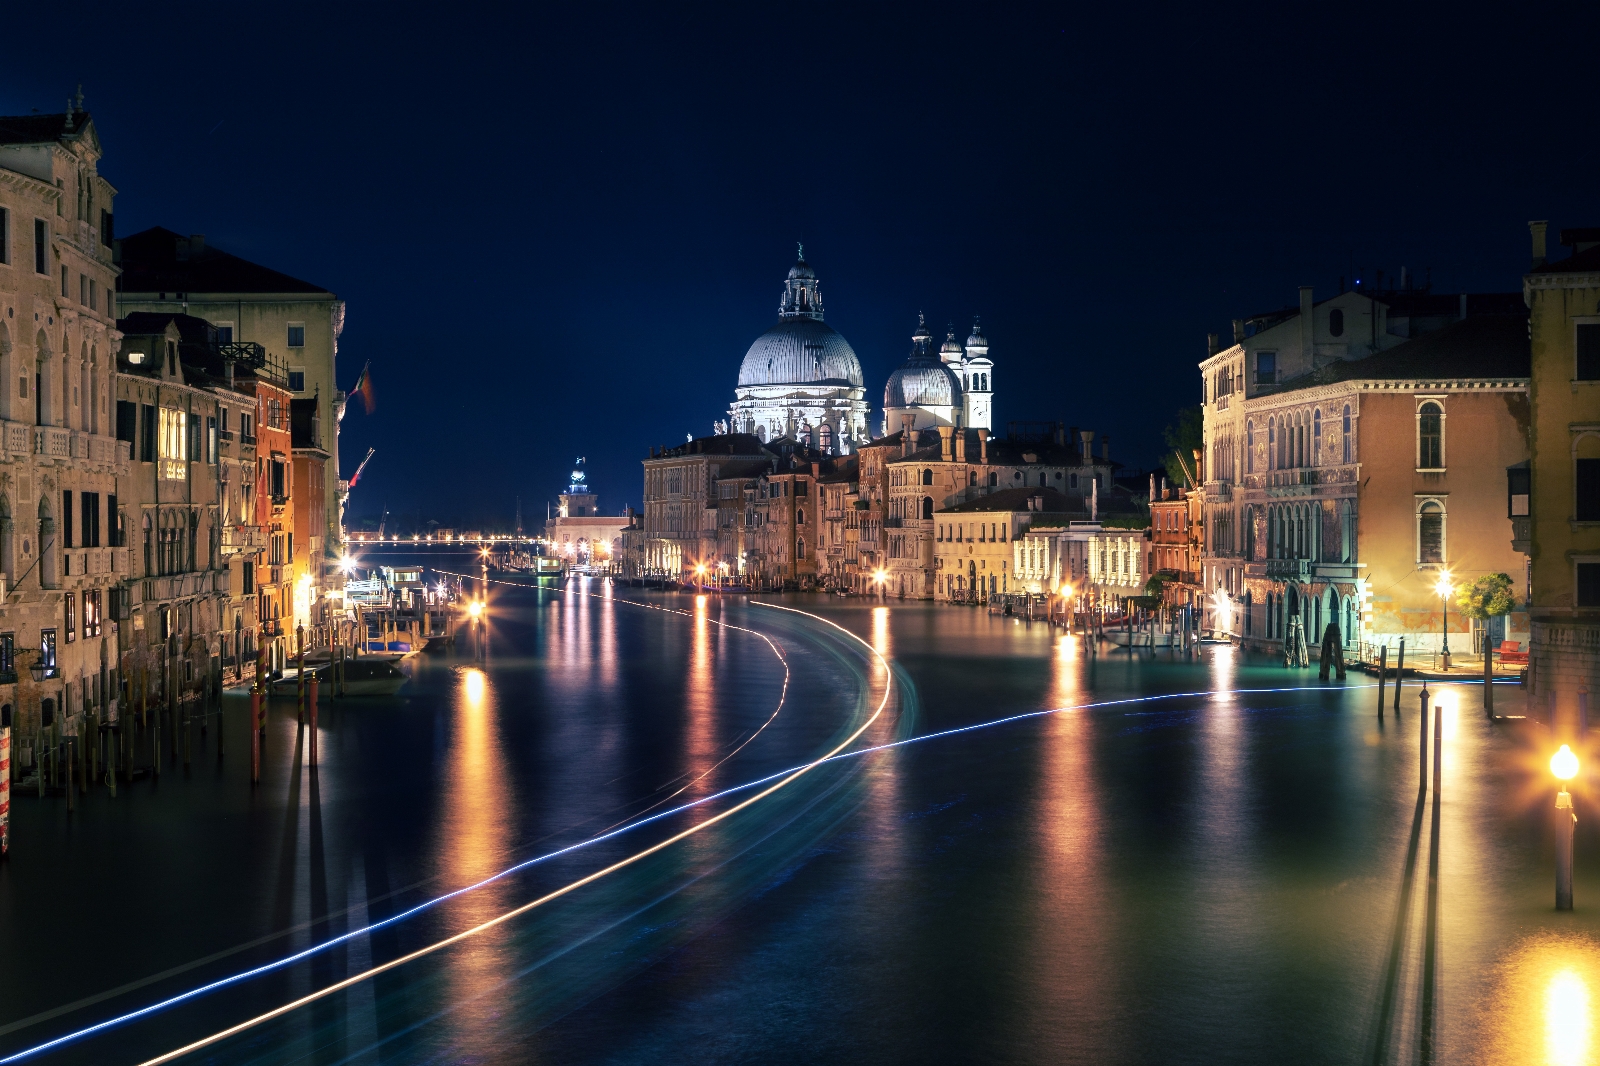 Image of Ponte dell\'Accademia by Paolo Montisci